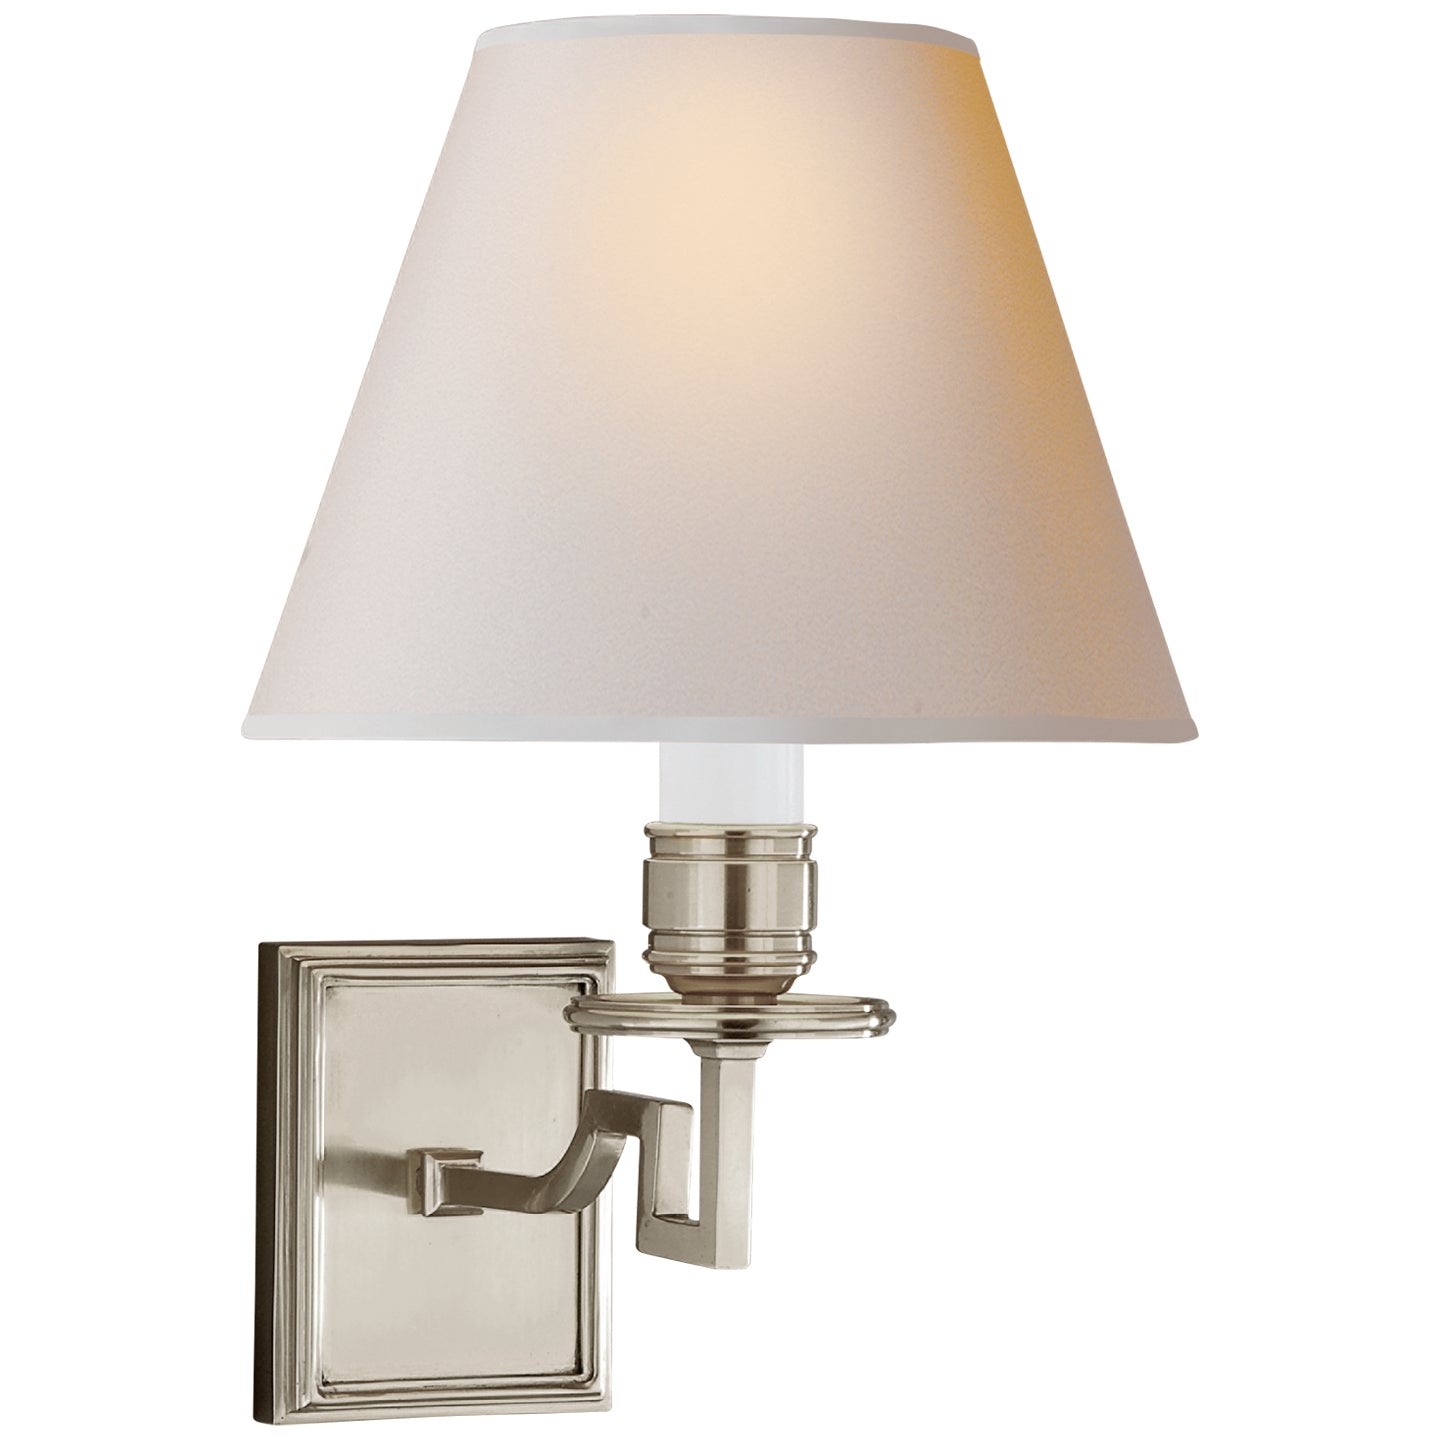 Visual Comfort Signature - AH 2000BN-NP - One Light Wall Sconce - Dean - Brushed Nickel